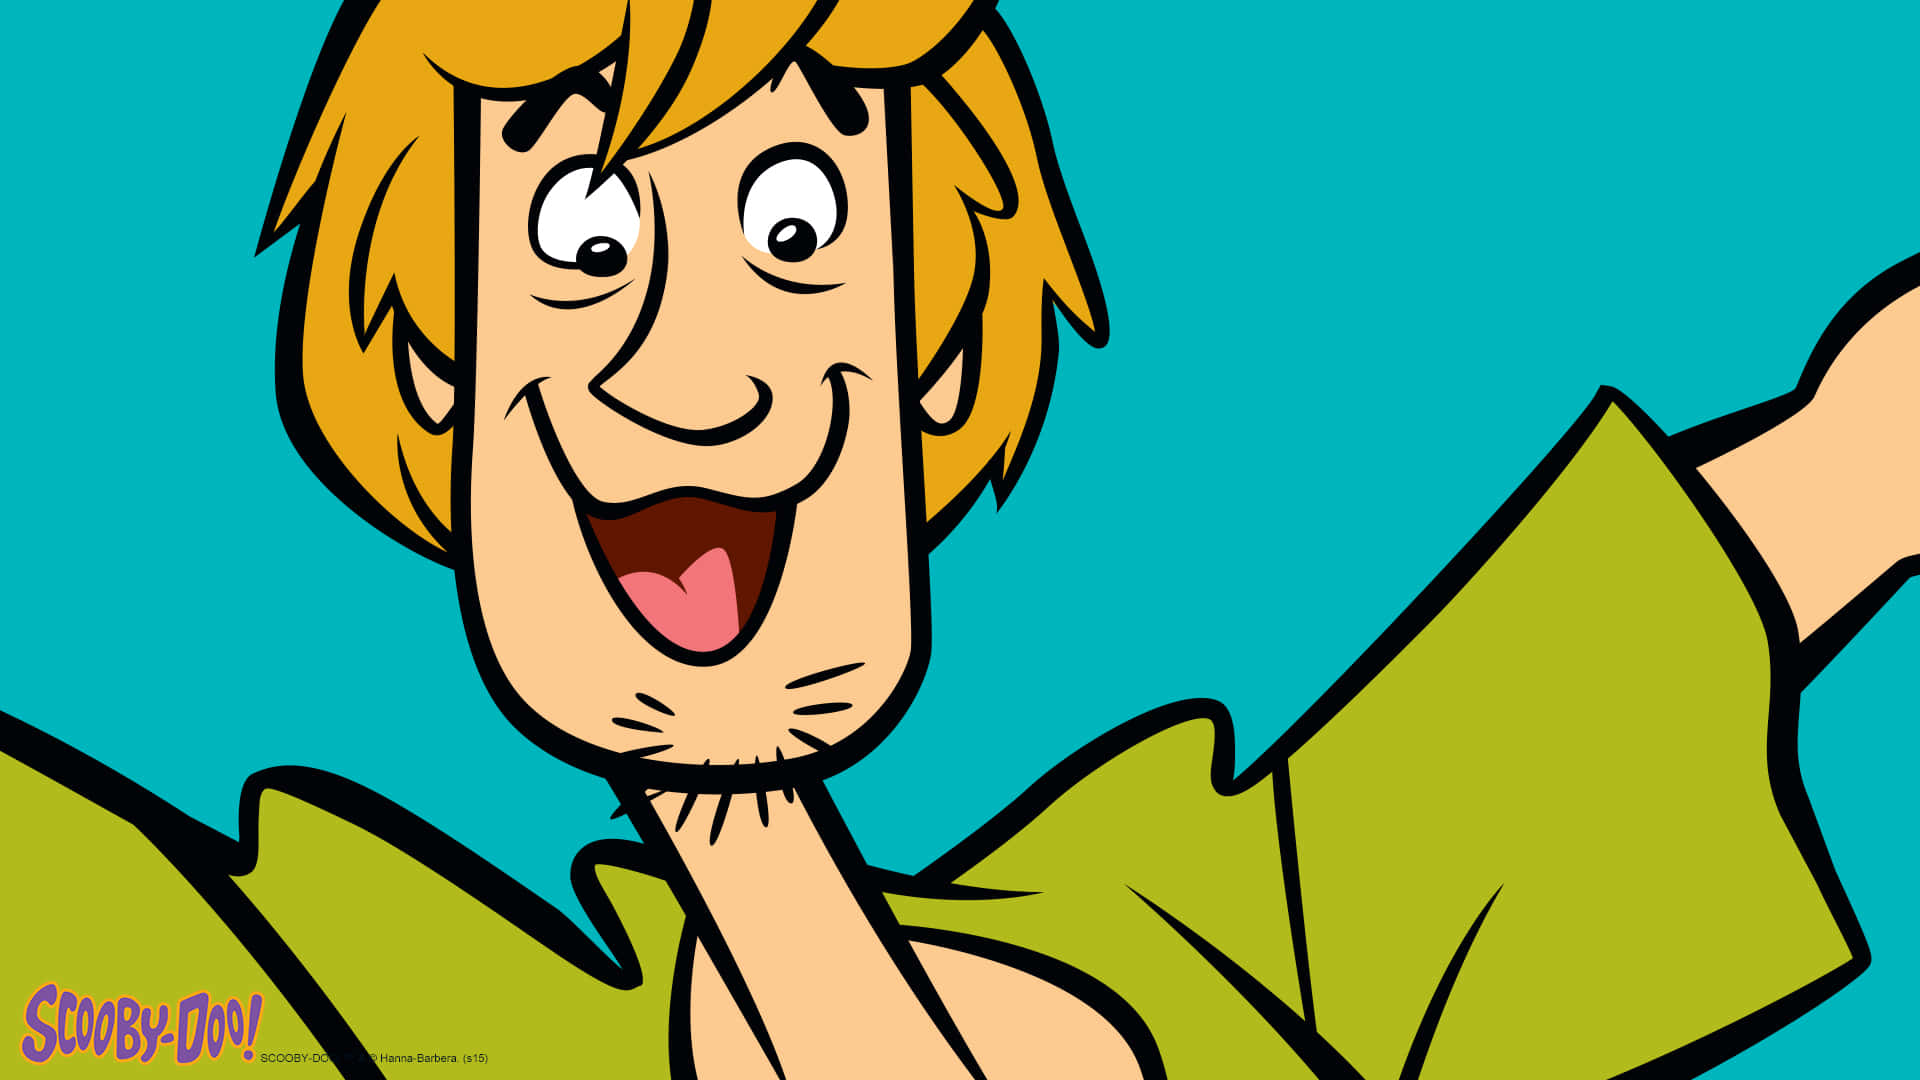 Everyone's favorite crime-solving Mystery Machine driver, Shaggy Rogers, ready for action! Wallpaper